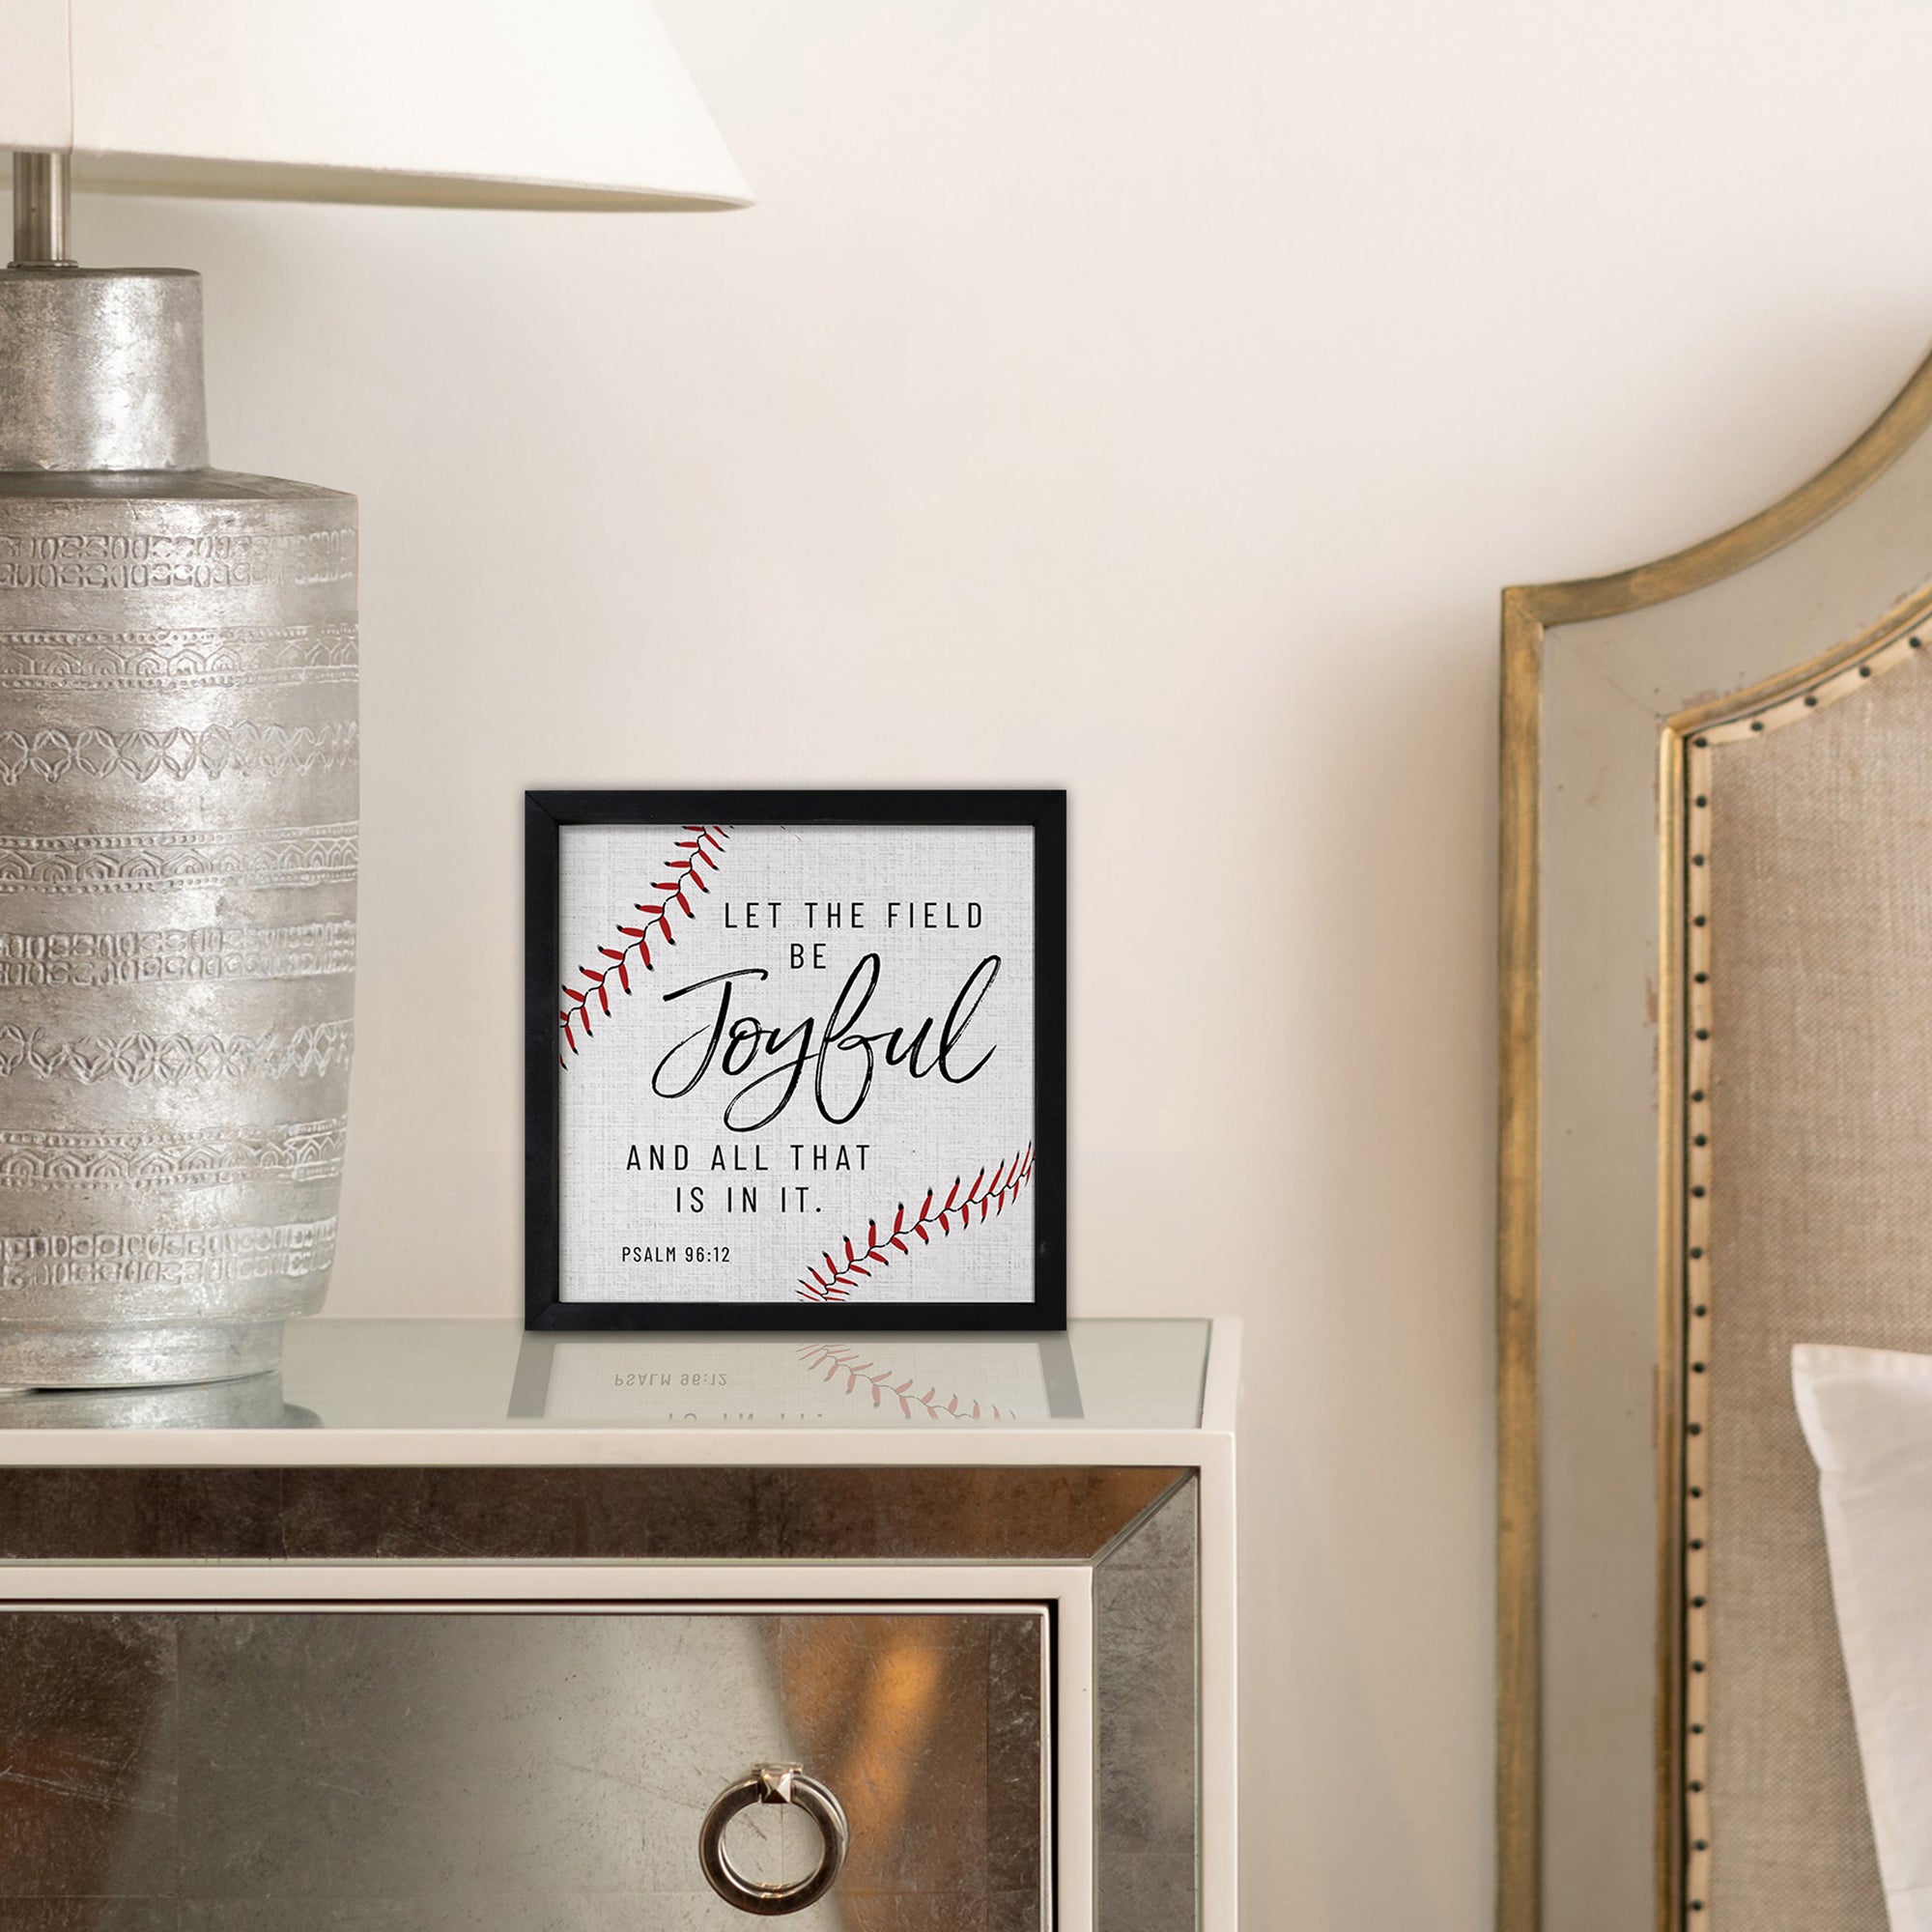 Rustic Wooden Baseball Framed Shadow Box Shelf Decor for sports enthusiasts and home decor lovers.